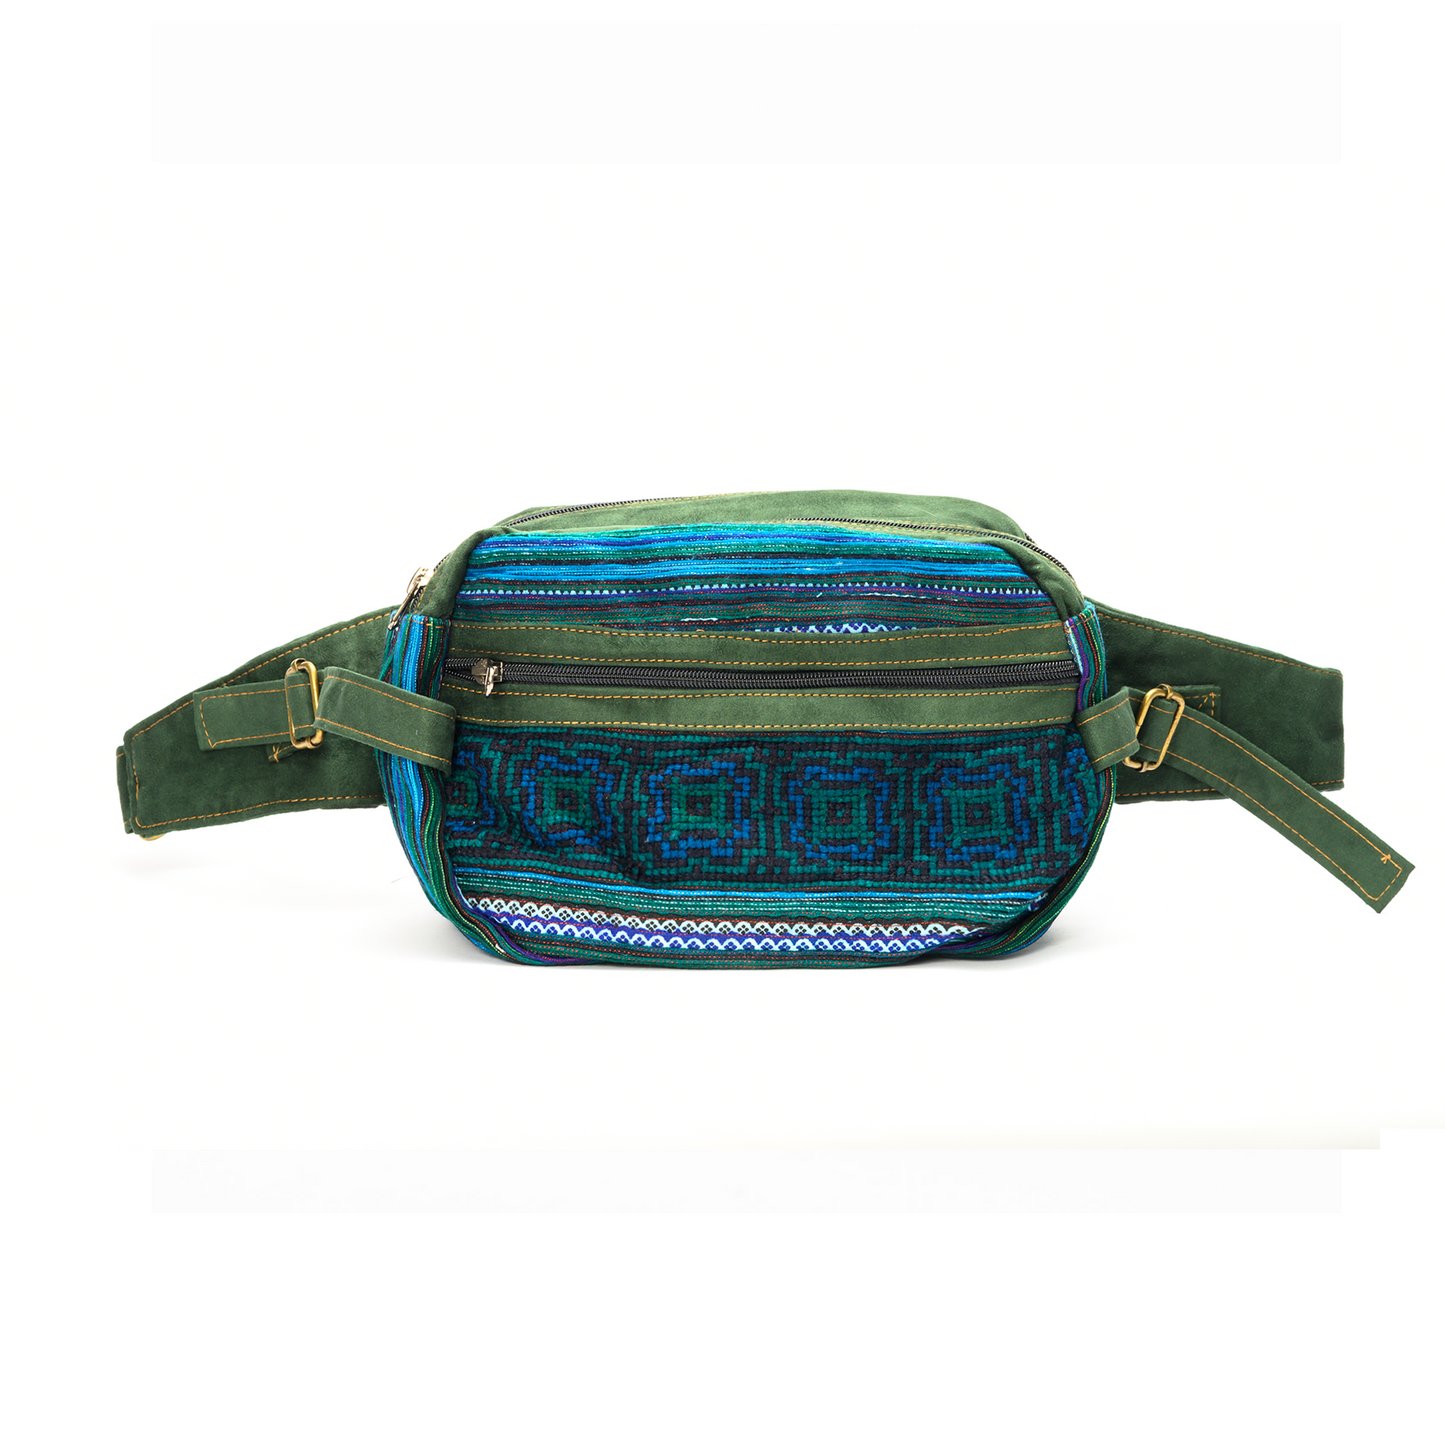 Green Waist bag, embroidery and faux leather